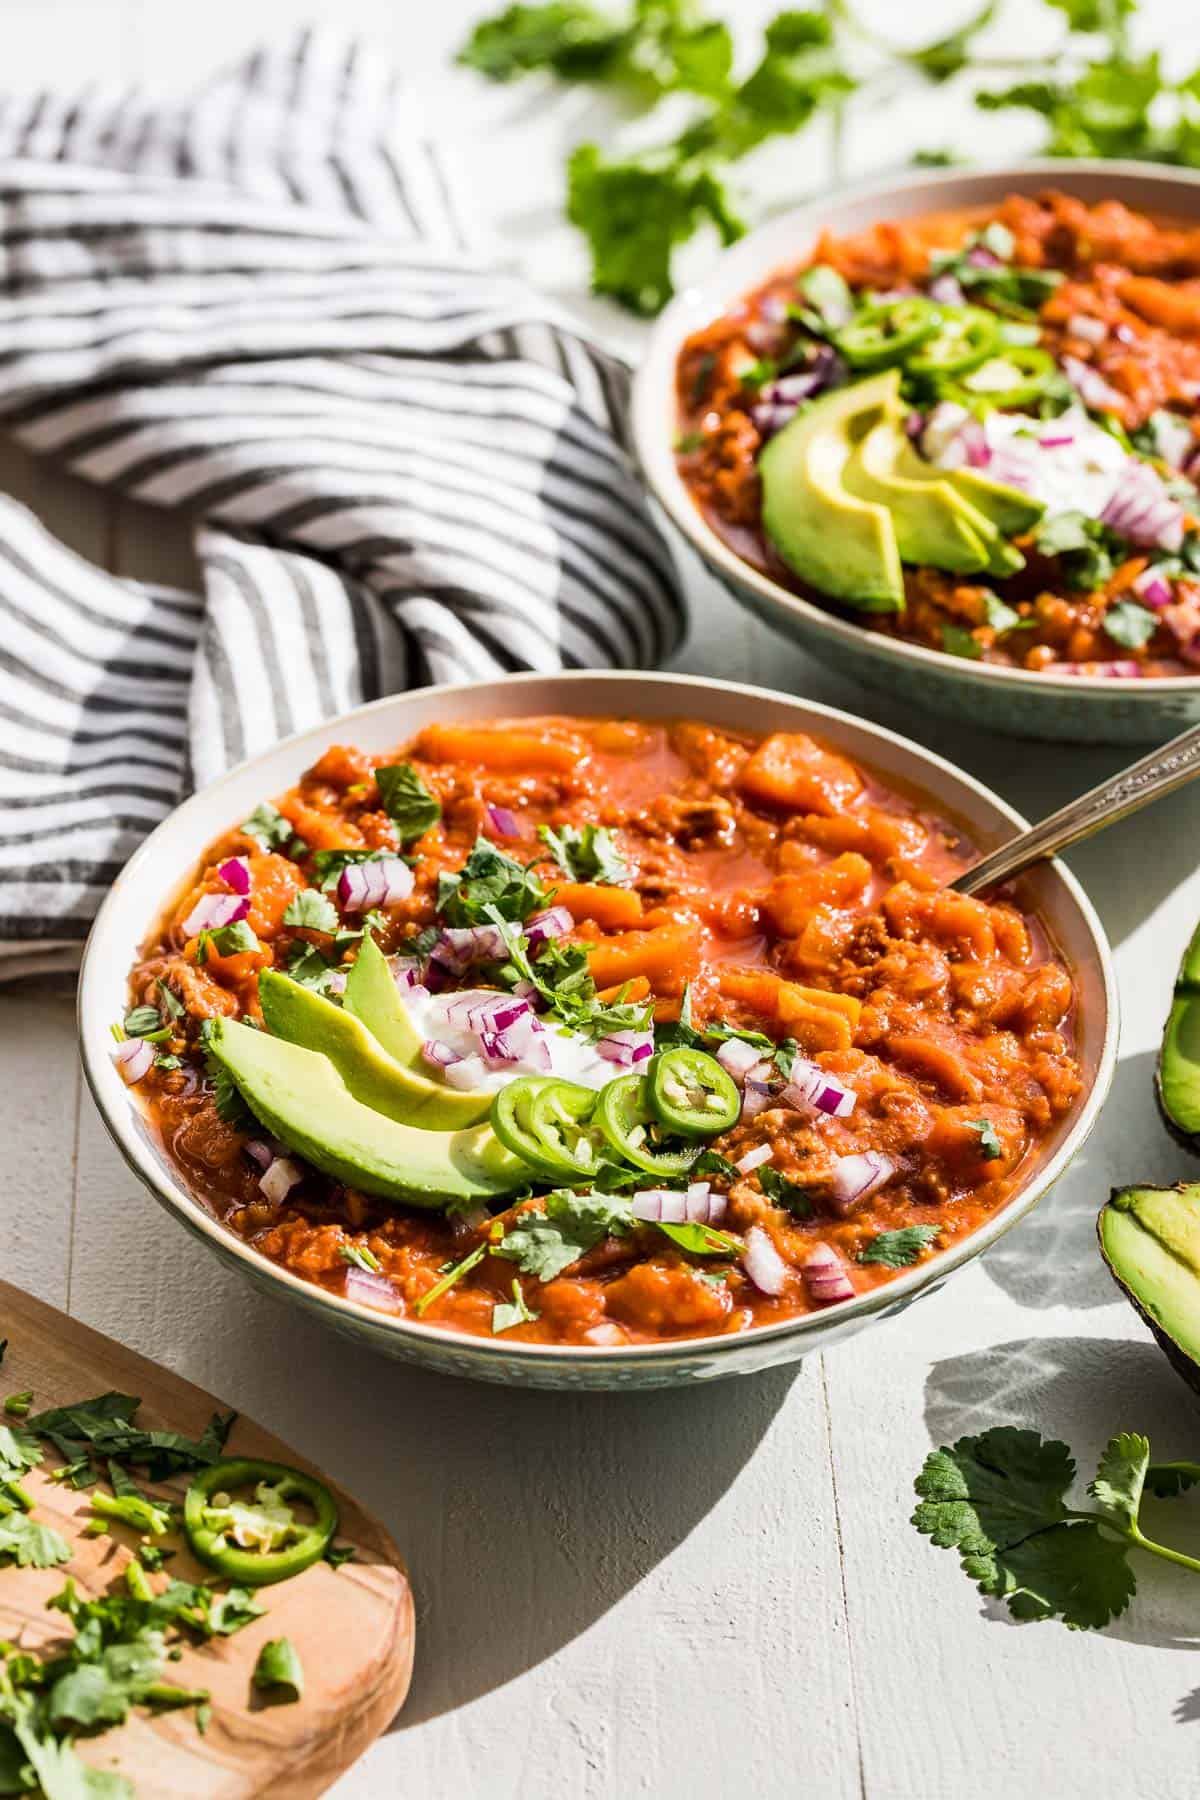 Two bowls of Whole30 chili with sliced avocado, jalapeno, red onion, and cilantro on top.